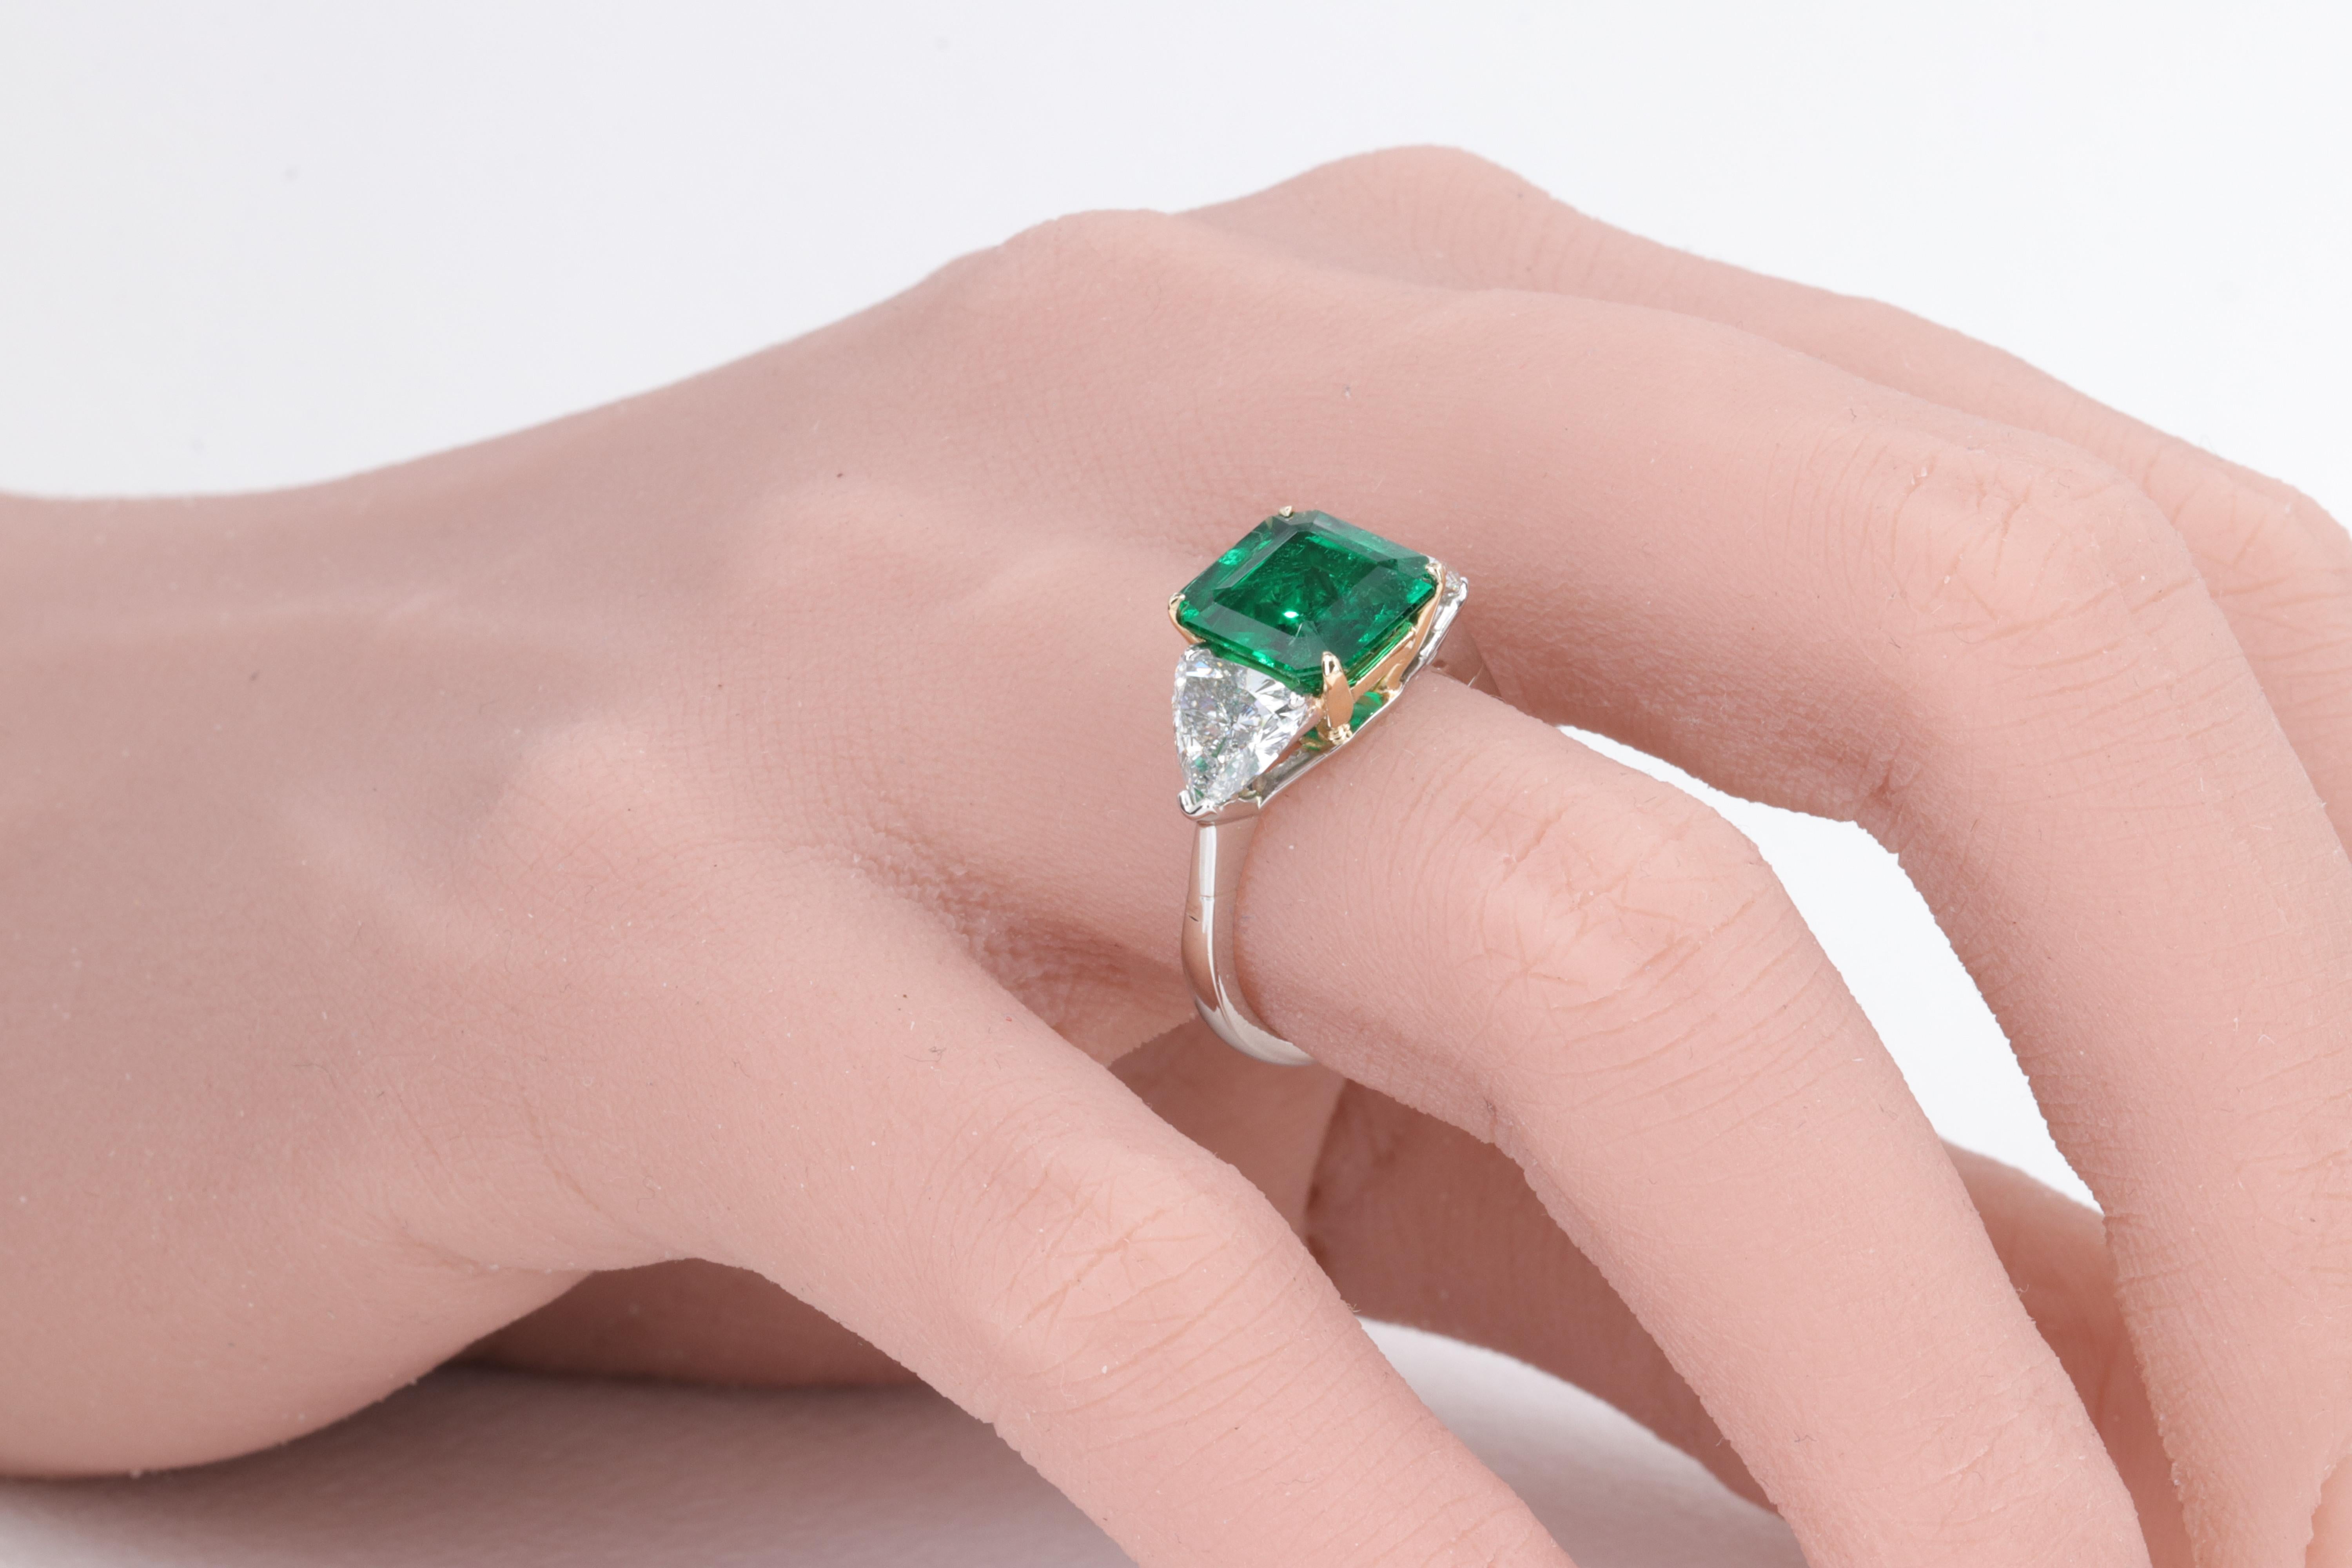 Hand fabricated platinum and 18 karat yellow gold three stone ring containing a 2.78ct Zambian Emerald with great clarity and exceptional vivid green color accompanied by and A.G.L. report set with two trillion cut diamonds weighing 1.55 carats in